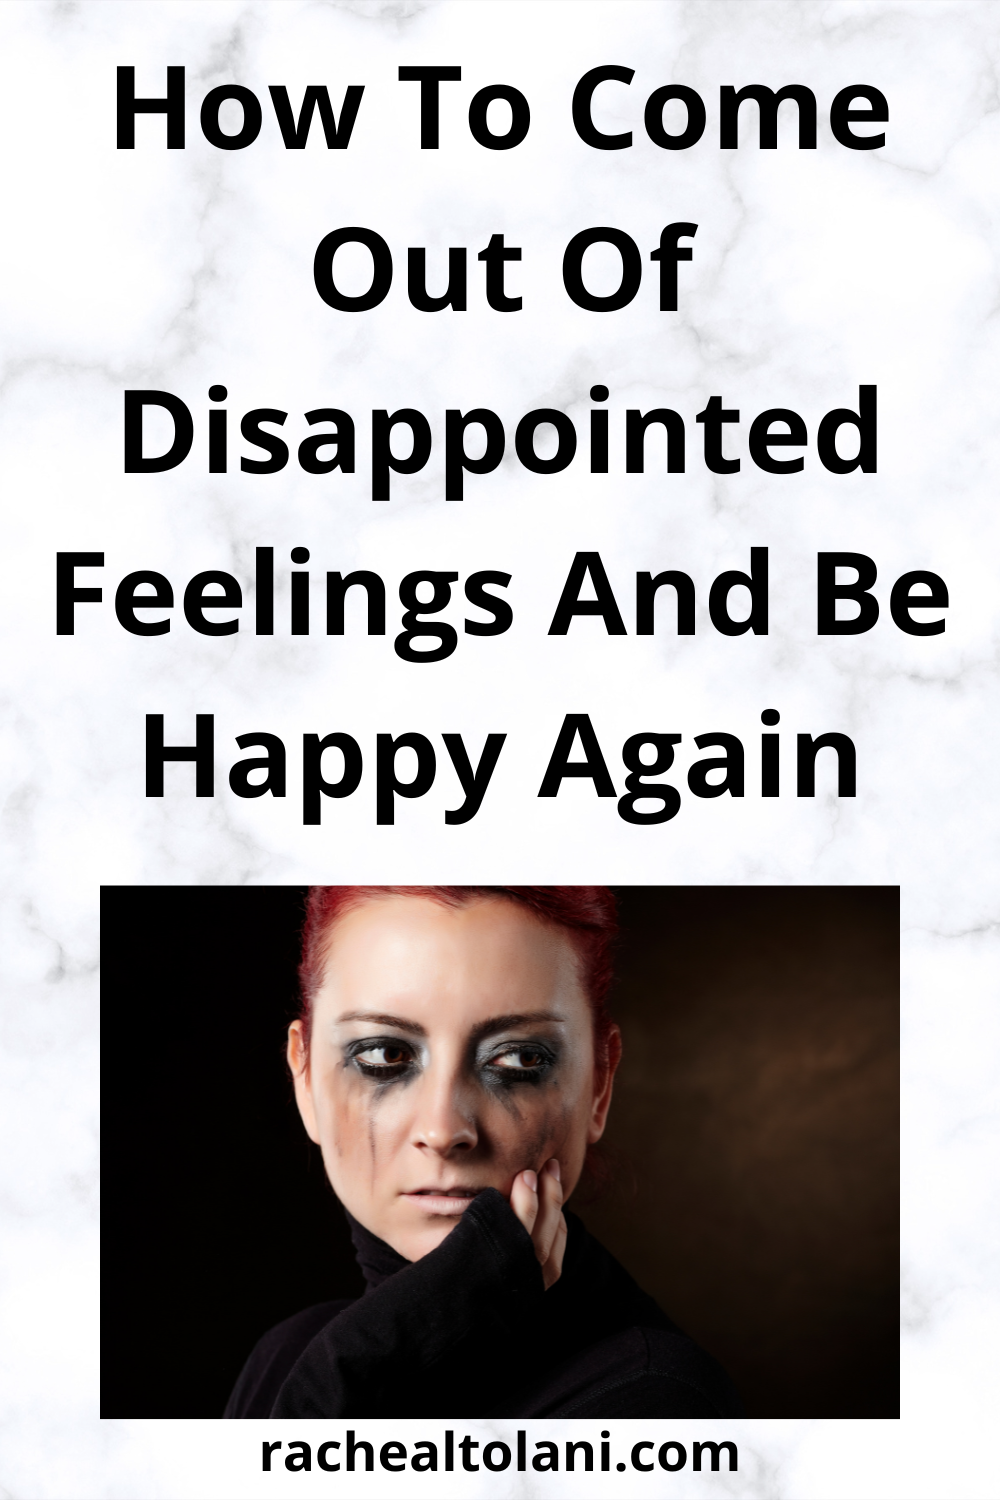 How to deal with disappointment